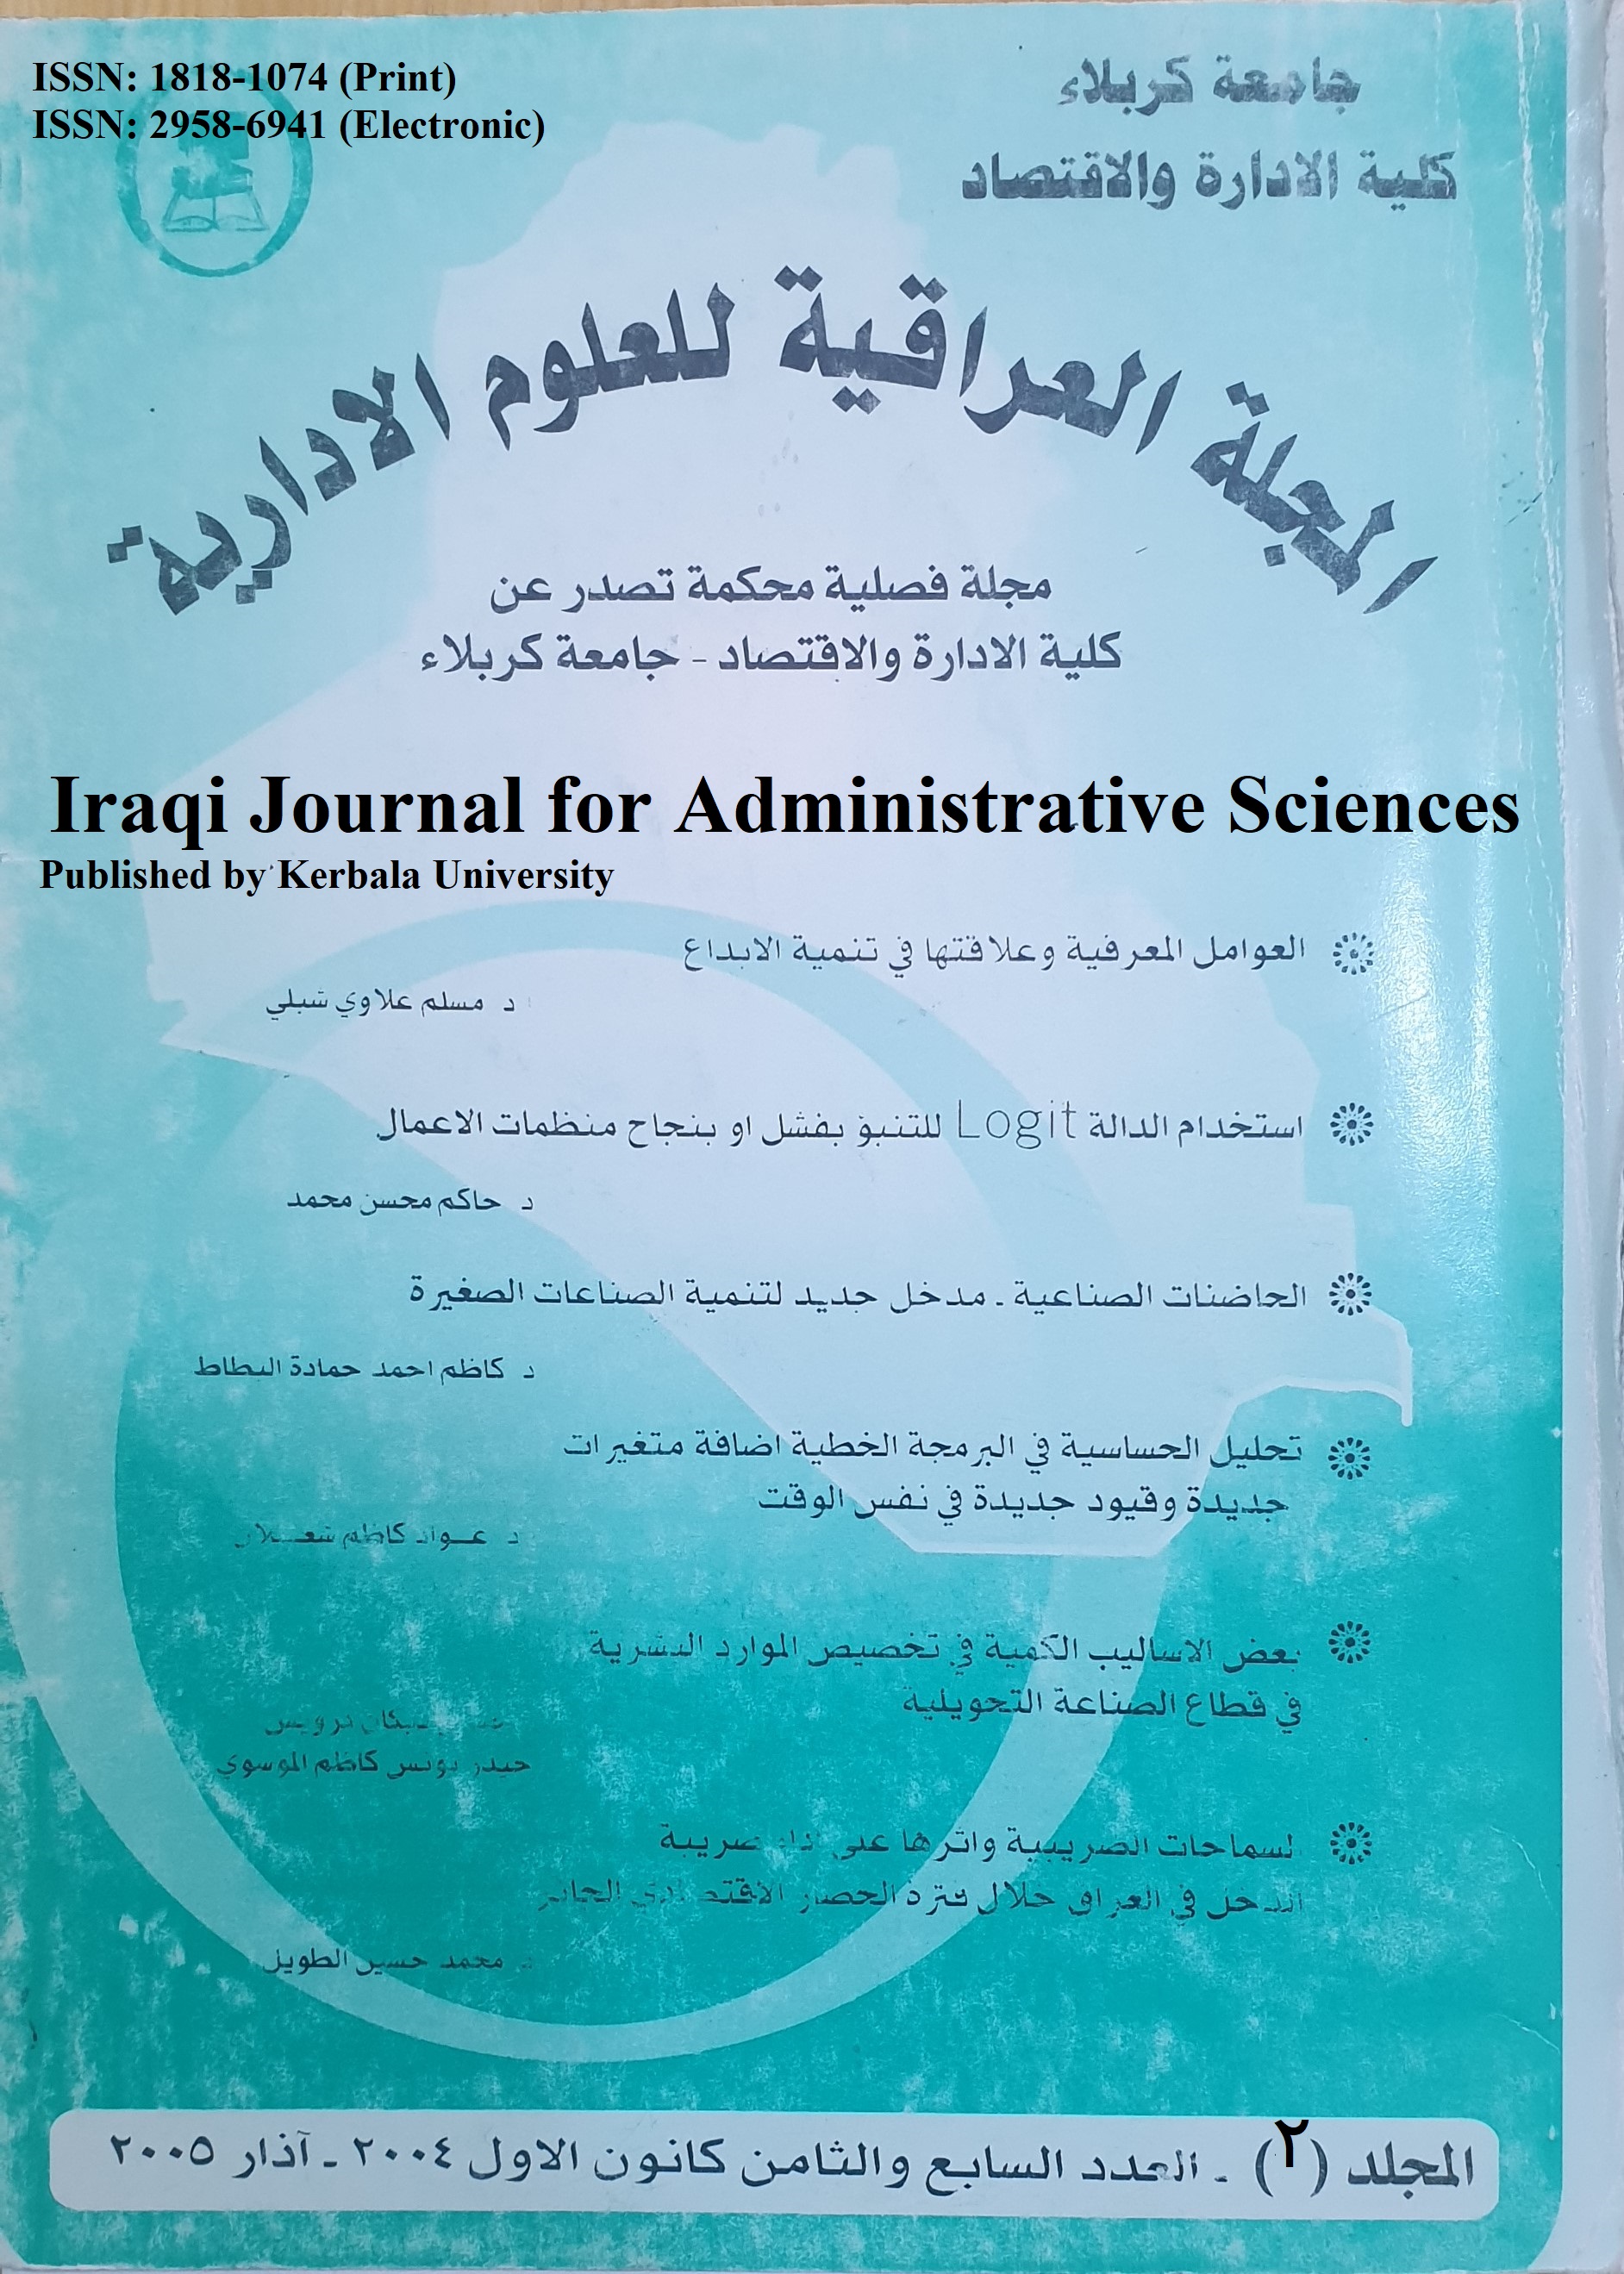 					View Vol. 2 No. 8-7 (2005): Iraqi Journal for Administrative Sciences
				